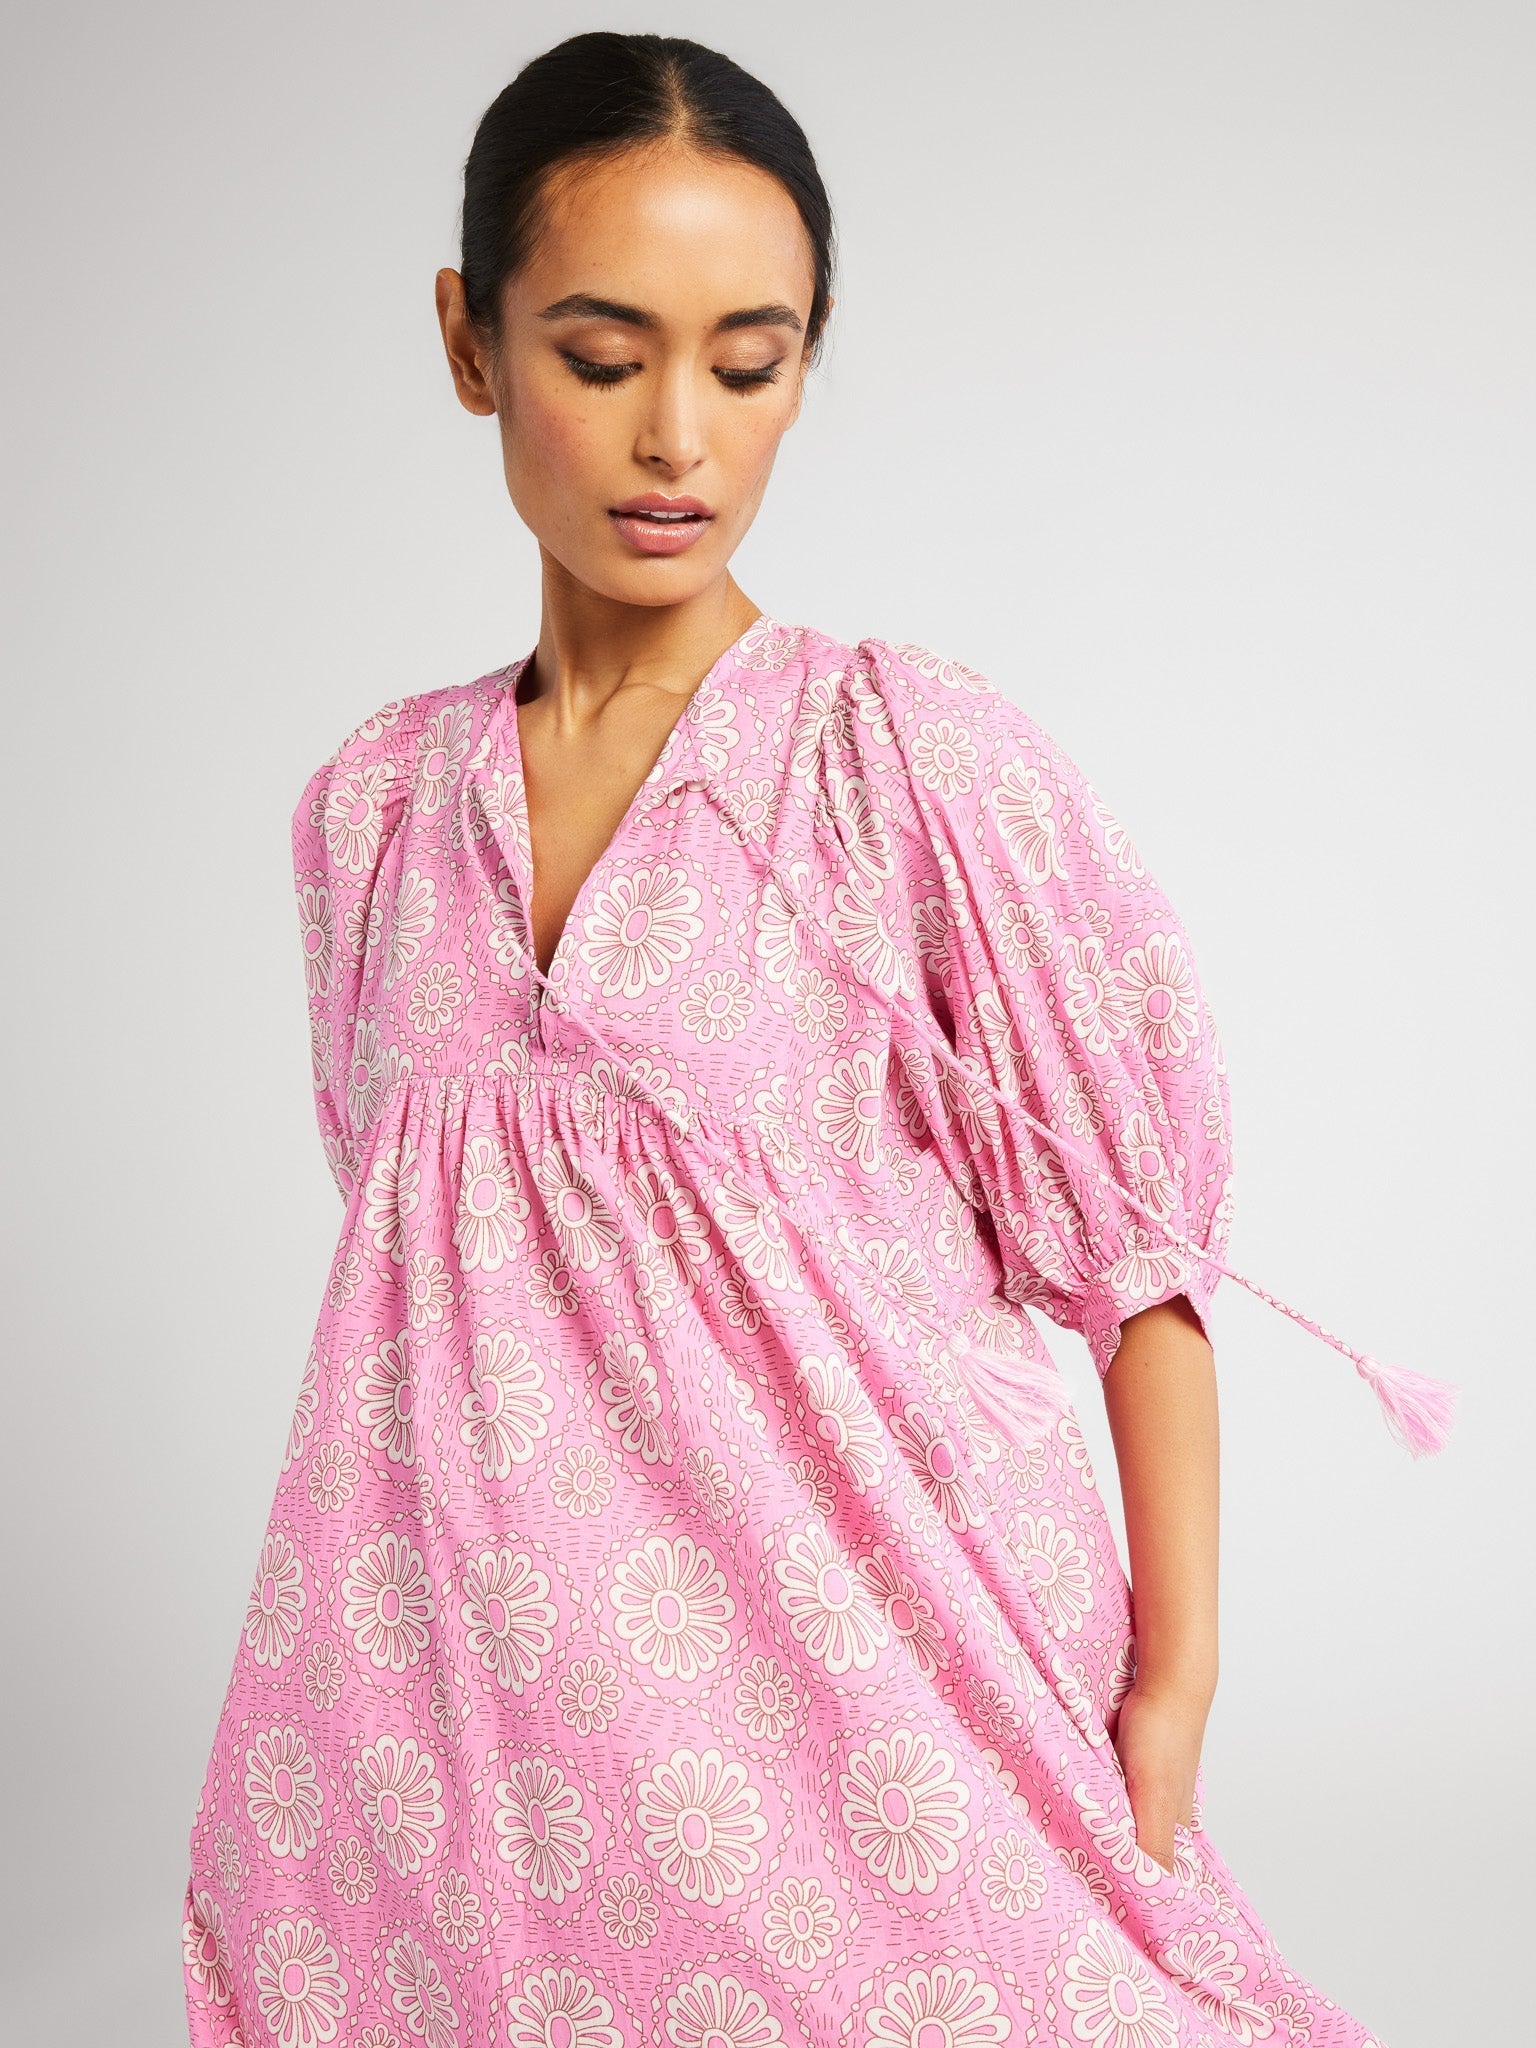 MILLE Clothing Saffron Dress in Pink Daisy